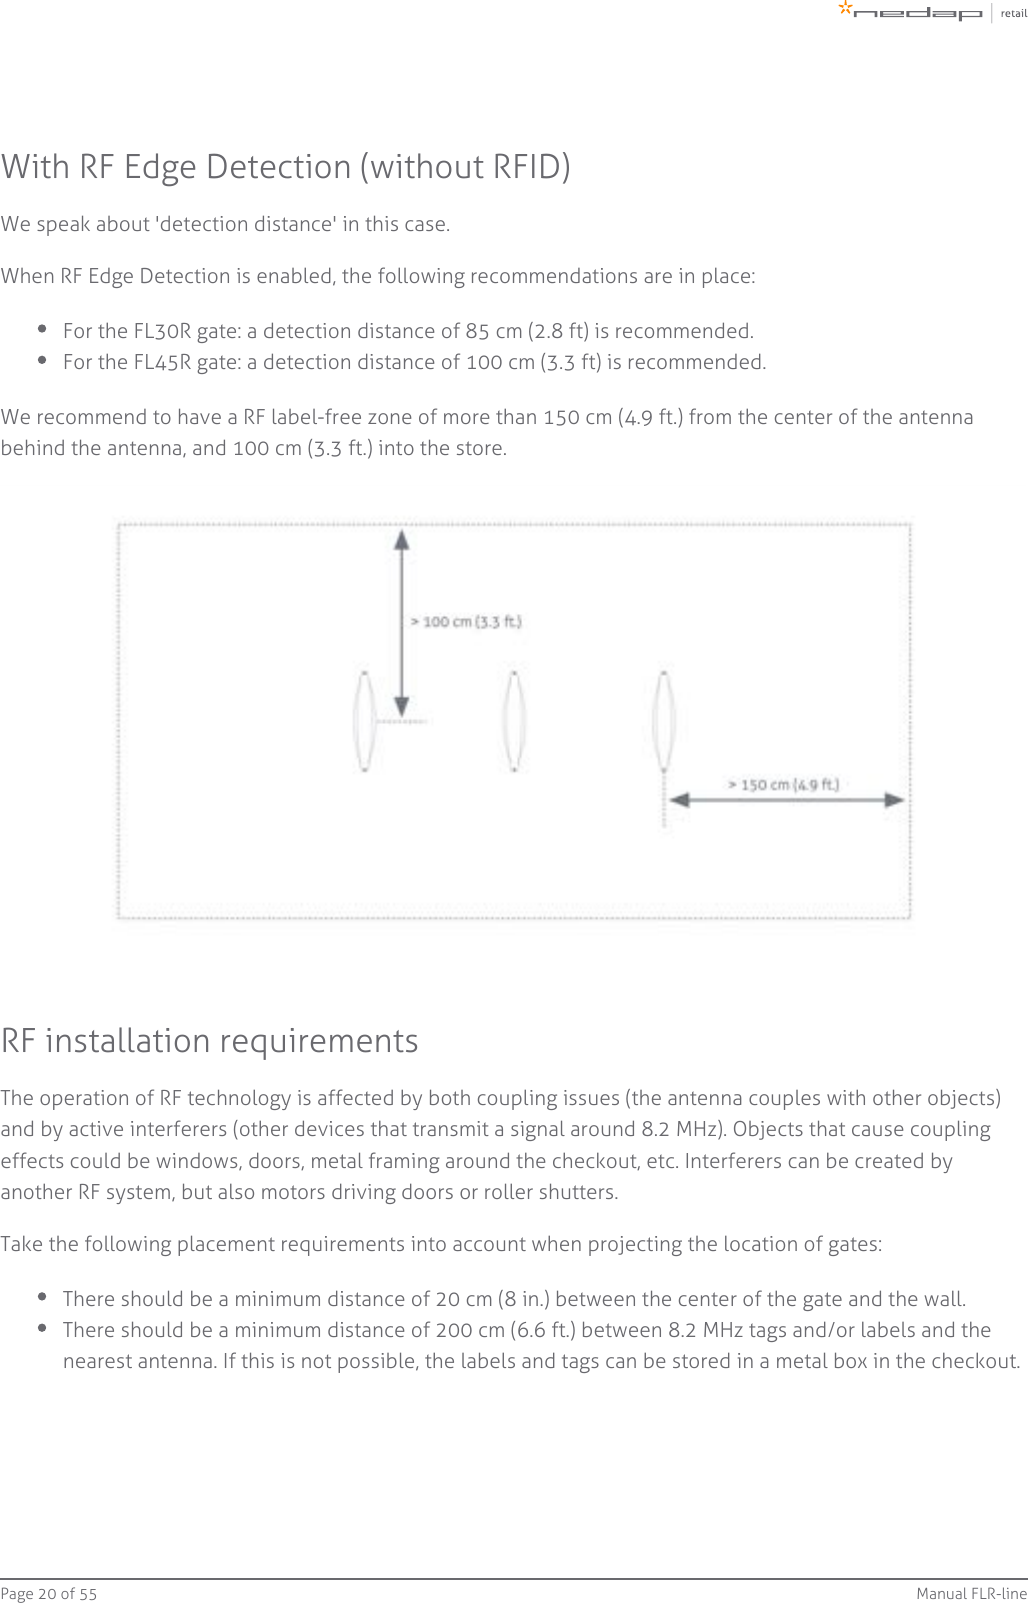 Page   of 20 55 Manual FLR-lineWith RF Edge Detection (without RFID)We speak about &apos;detection distance&apos; in this case.When RF Edge Detection is enabled, the following recommendations are in place:For the FL30R gate: a detection distance of 85 cm (2.8 ft) is recommended.For the FL45R gate: a detection distance of 100 cm (3.3 ft) is recommended.We recommend to have a RF label-free zone of more than 150 cm (4.9 ft.) from the center of the antennabehind the antenna, and 100 cm (3.3 ft.) into the store.RF installation requirementsThe operation of RF technology is affected by both coupling issues (the antenna couples with other objects)and by active interferers (other devices that transmit a signal around 8.2 MHz). Objects that cause couplingeffects could be windows, doors, metal framing around the checkout, etc. Interferers can be created byanother RF system, but also motors driving doors or roller shutters.Take the following placement requirements into account when projecting the location of gates:There should be a minimum distance of 20 cm (8 in.) between the center of the gate and the wall.There should be a minimum distance of 200 cm (6.6 ft.) between 8.2 MHz tags and/or labels and thenearest antenna. If this is not possible, the labels and tags can be stored in a metal box in the checkout.